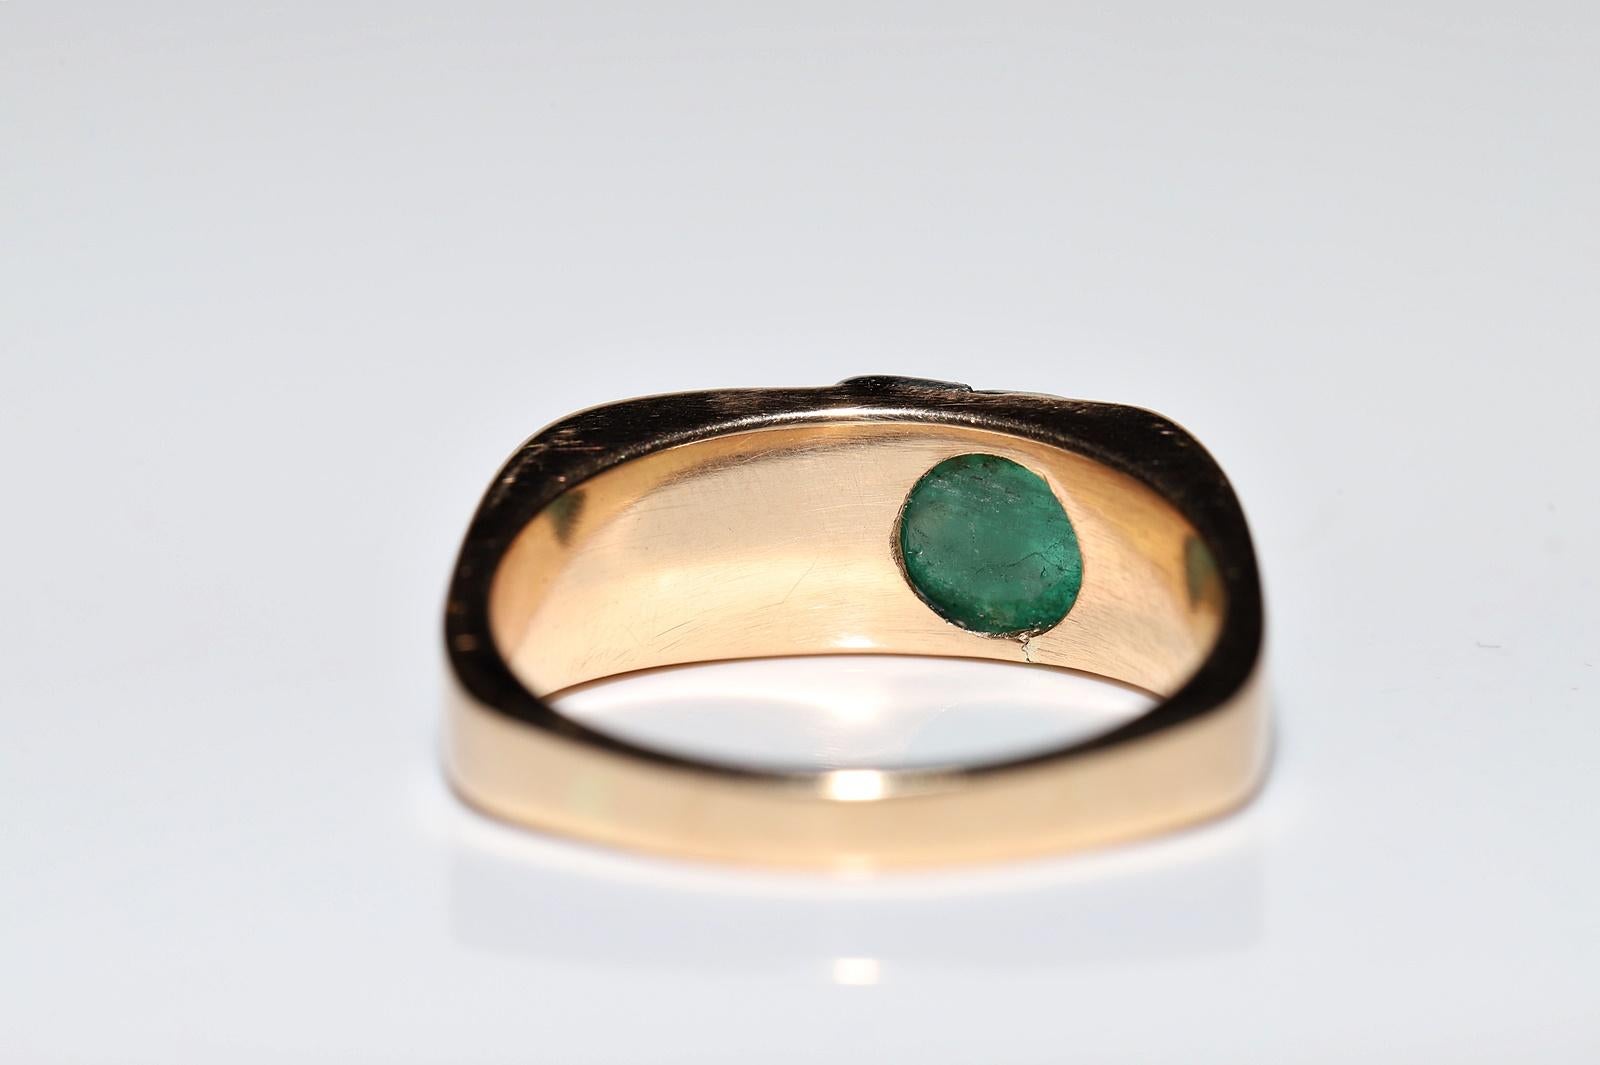 Antique Circa 1900s 18k Gold Natural Diamond And Cabochon Emerald Decorated Ring For Sale 3